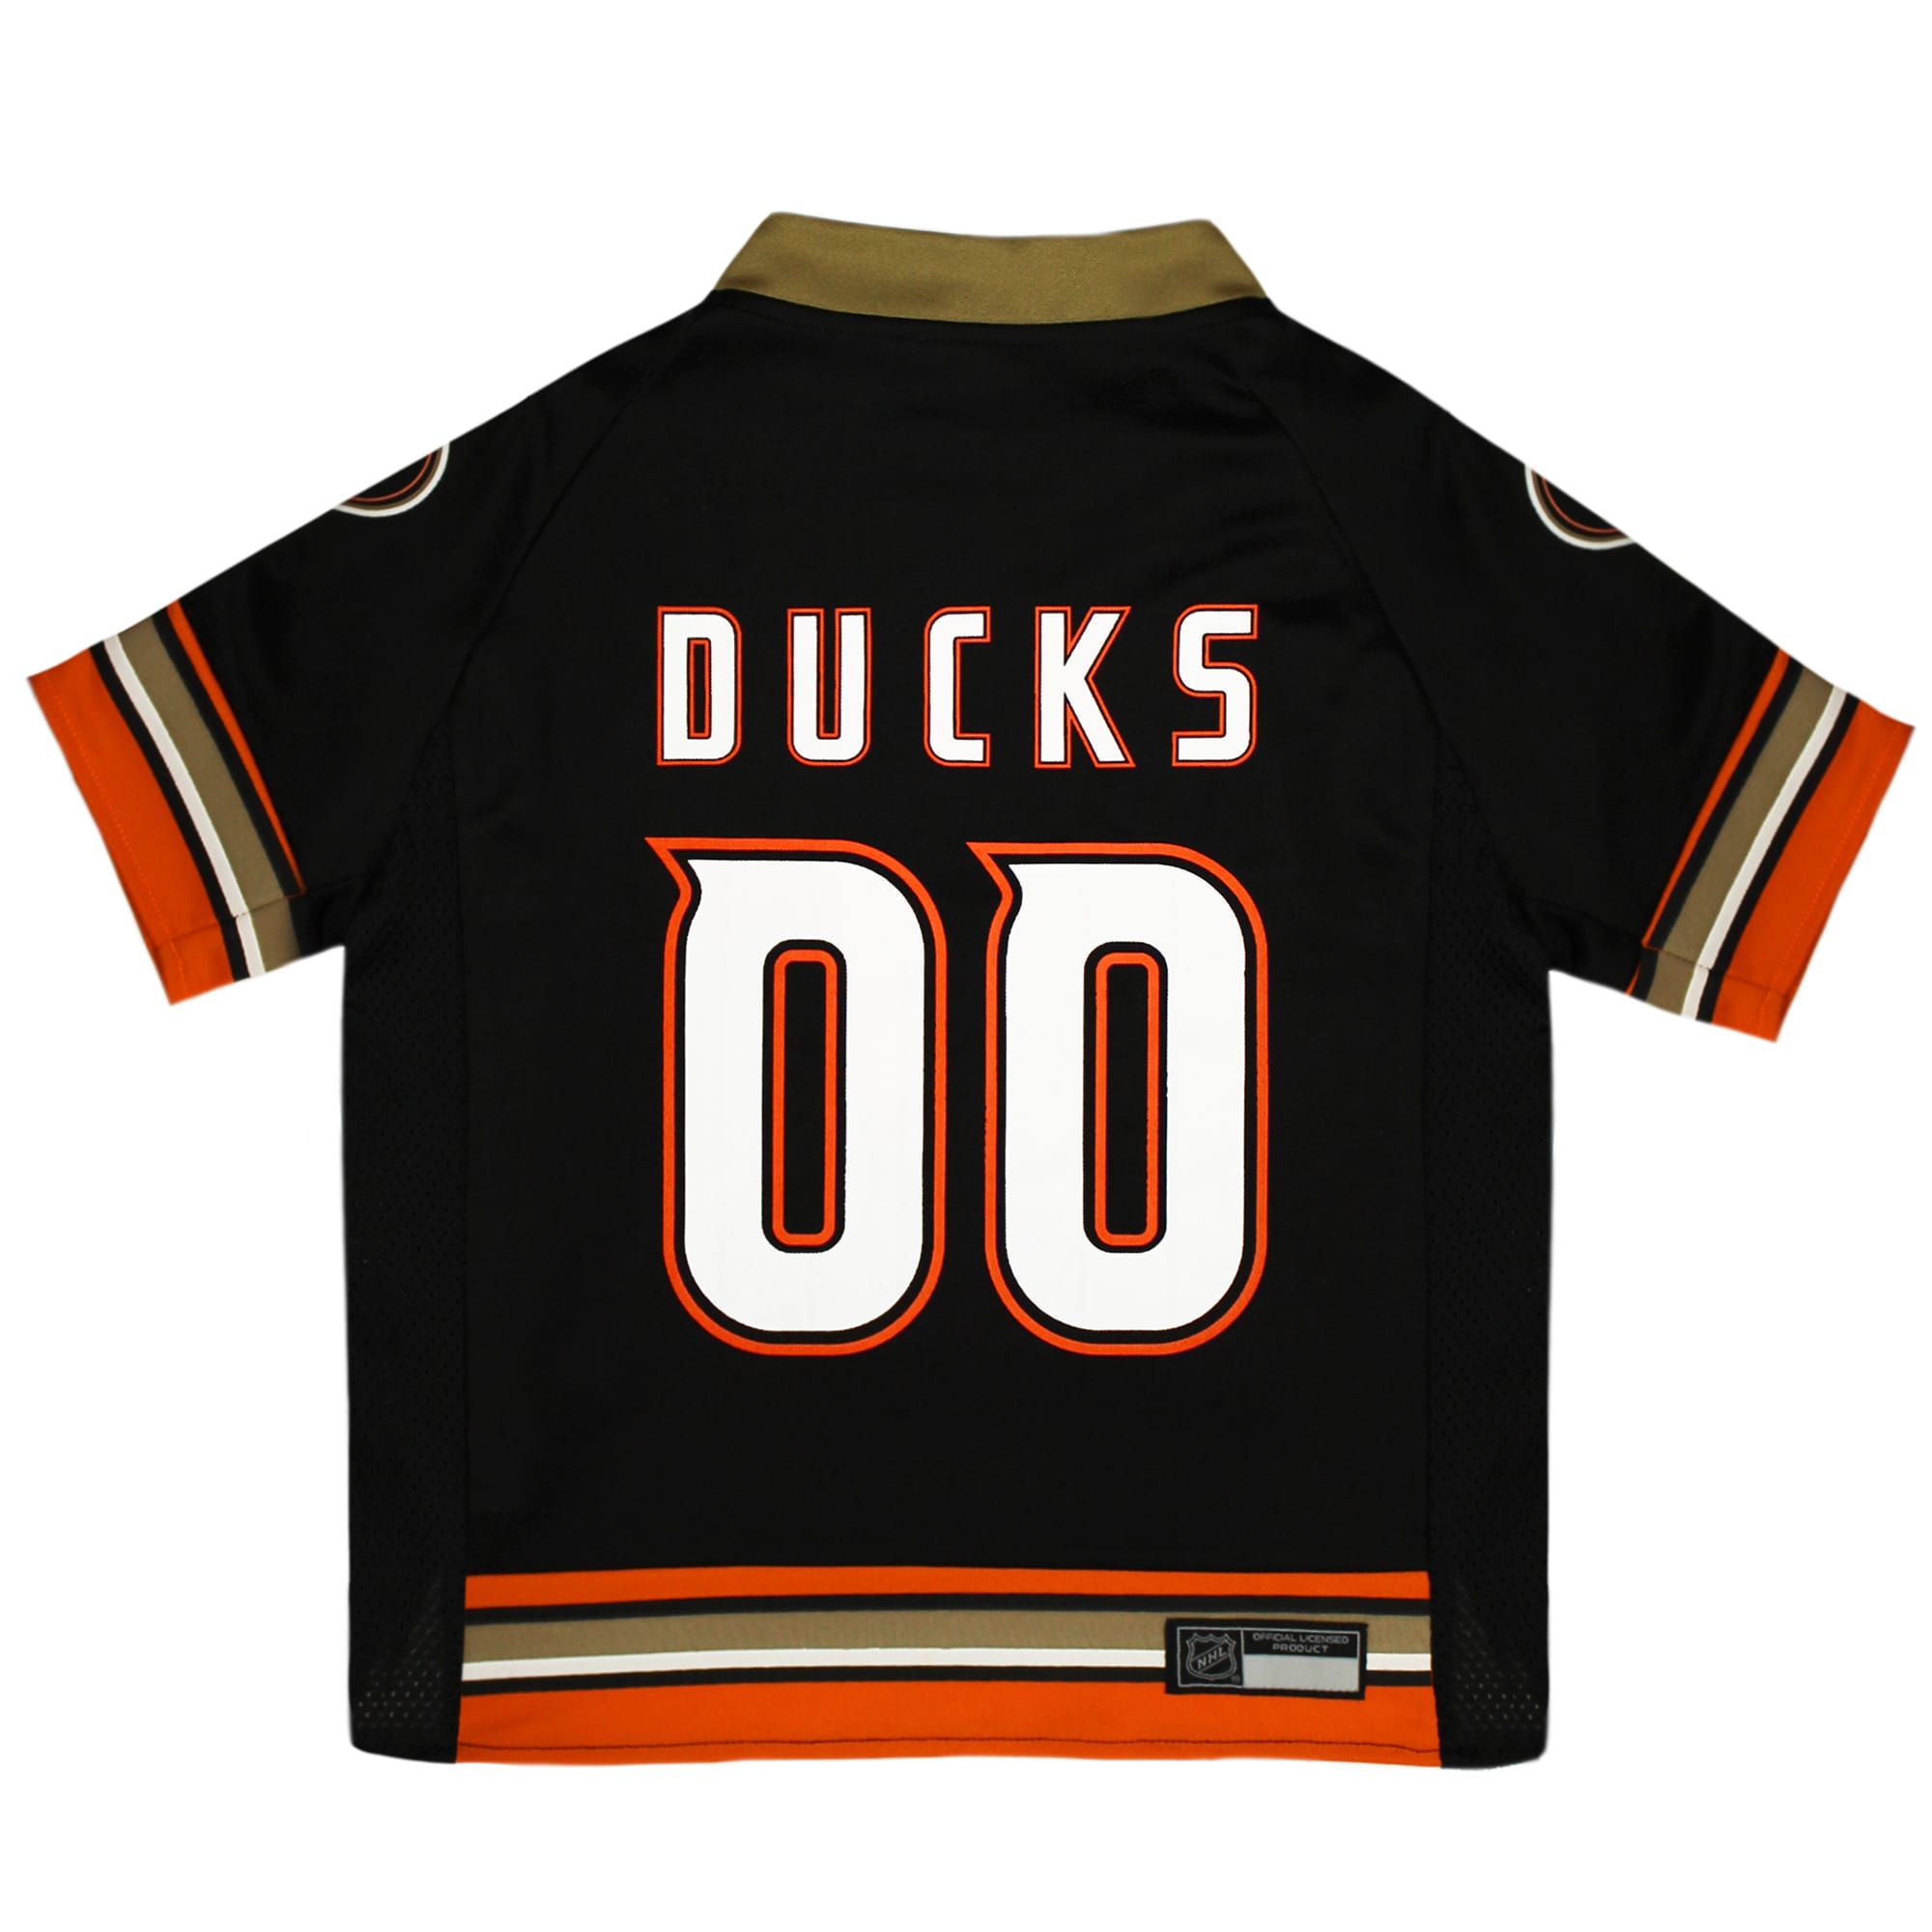 Made a custom Orioles hockey jersey to wear for Opening Day this